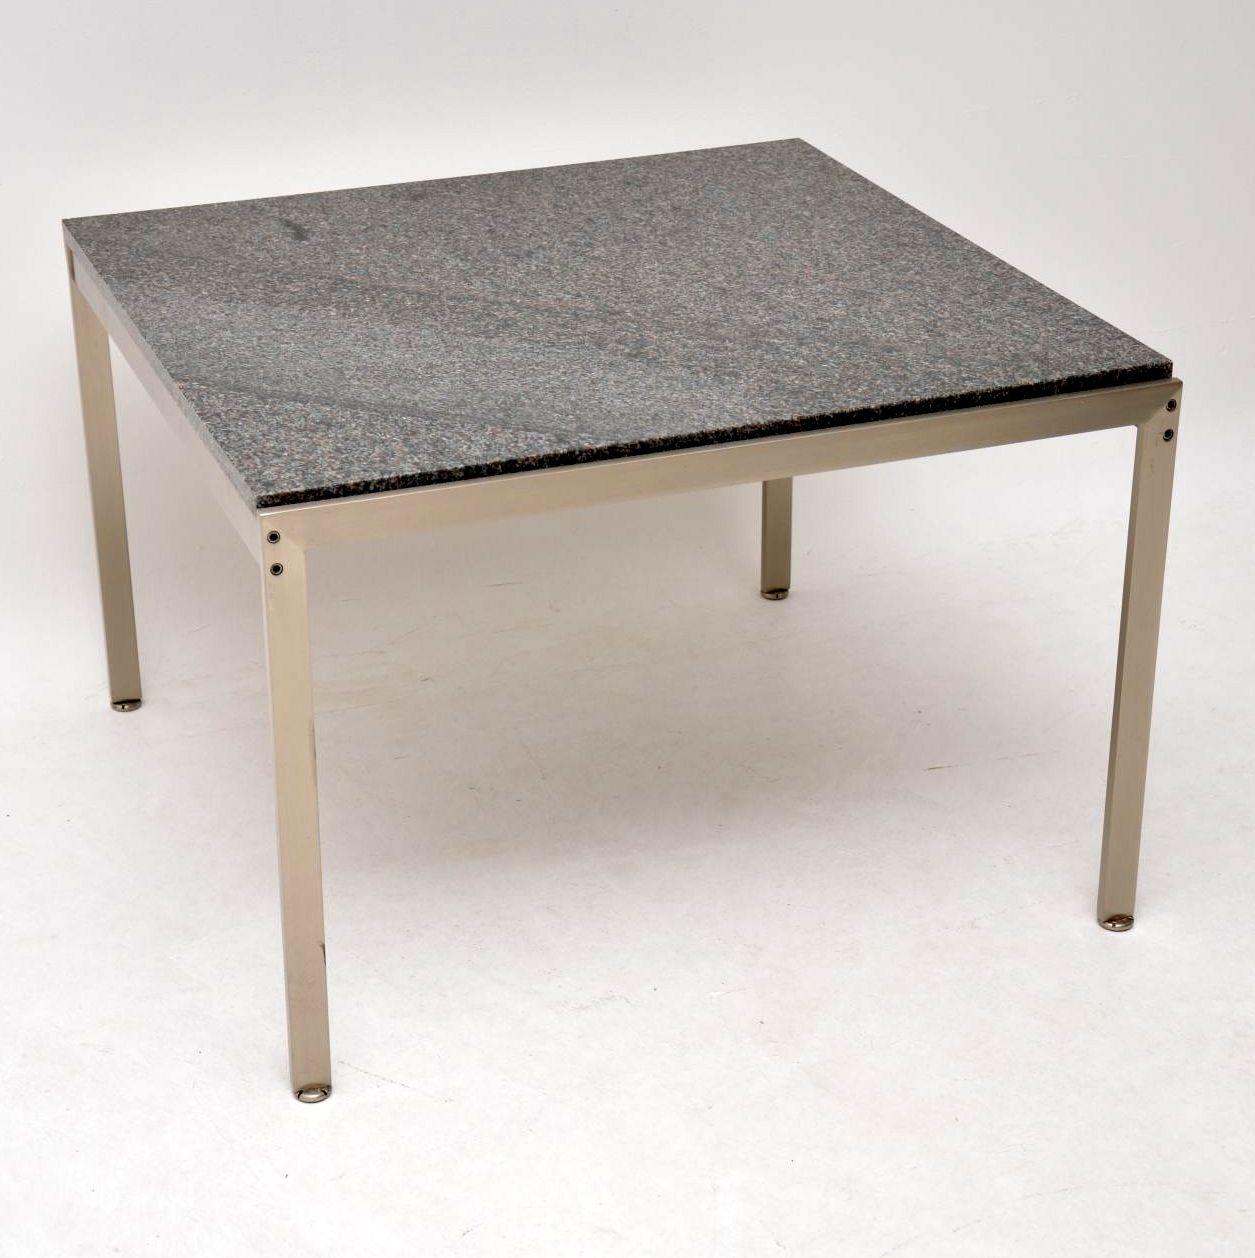 A beautifully made and extremely stylish pair of vintage steel tables with polished granite tops, these are in the style of the famous Danish designer Poul Kjærholm. We’re not sure who made them, but the quality is absolutely amazing, these are